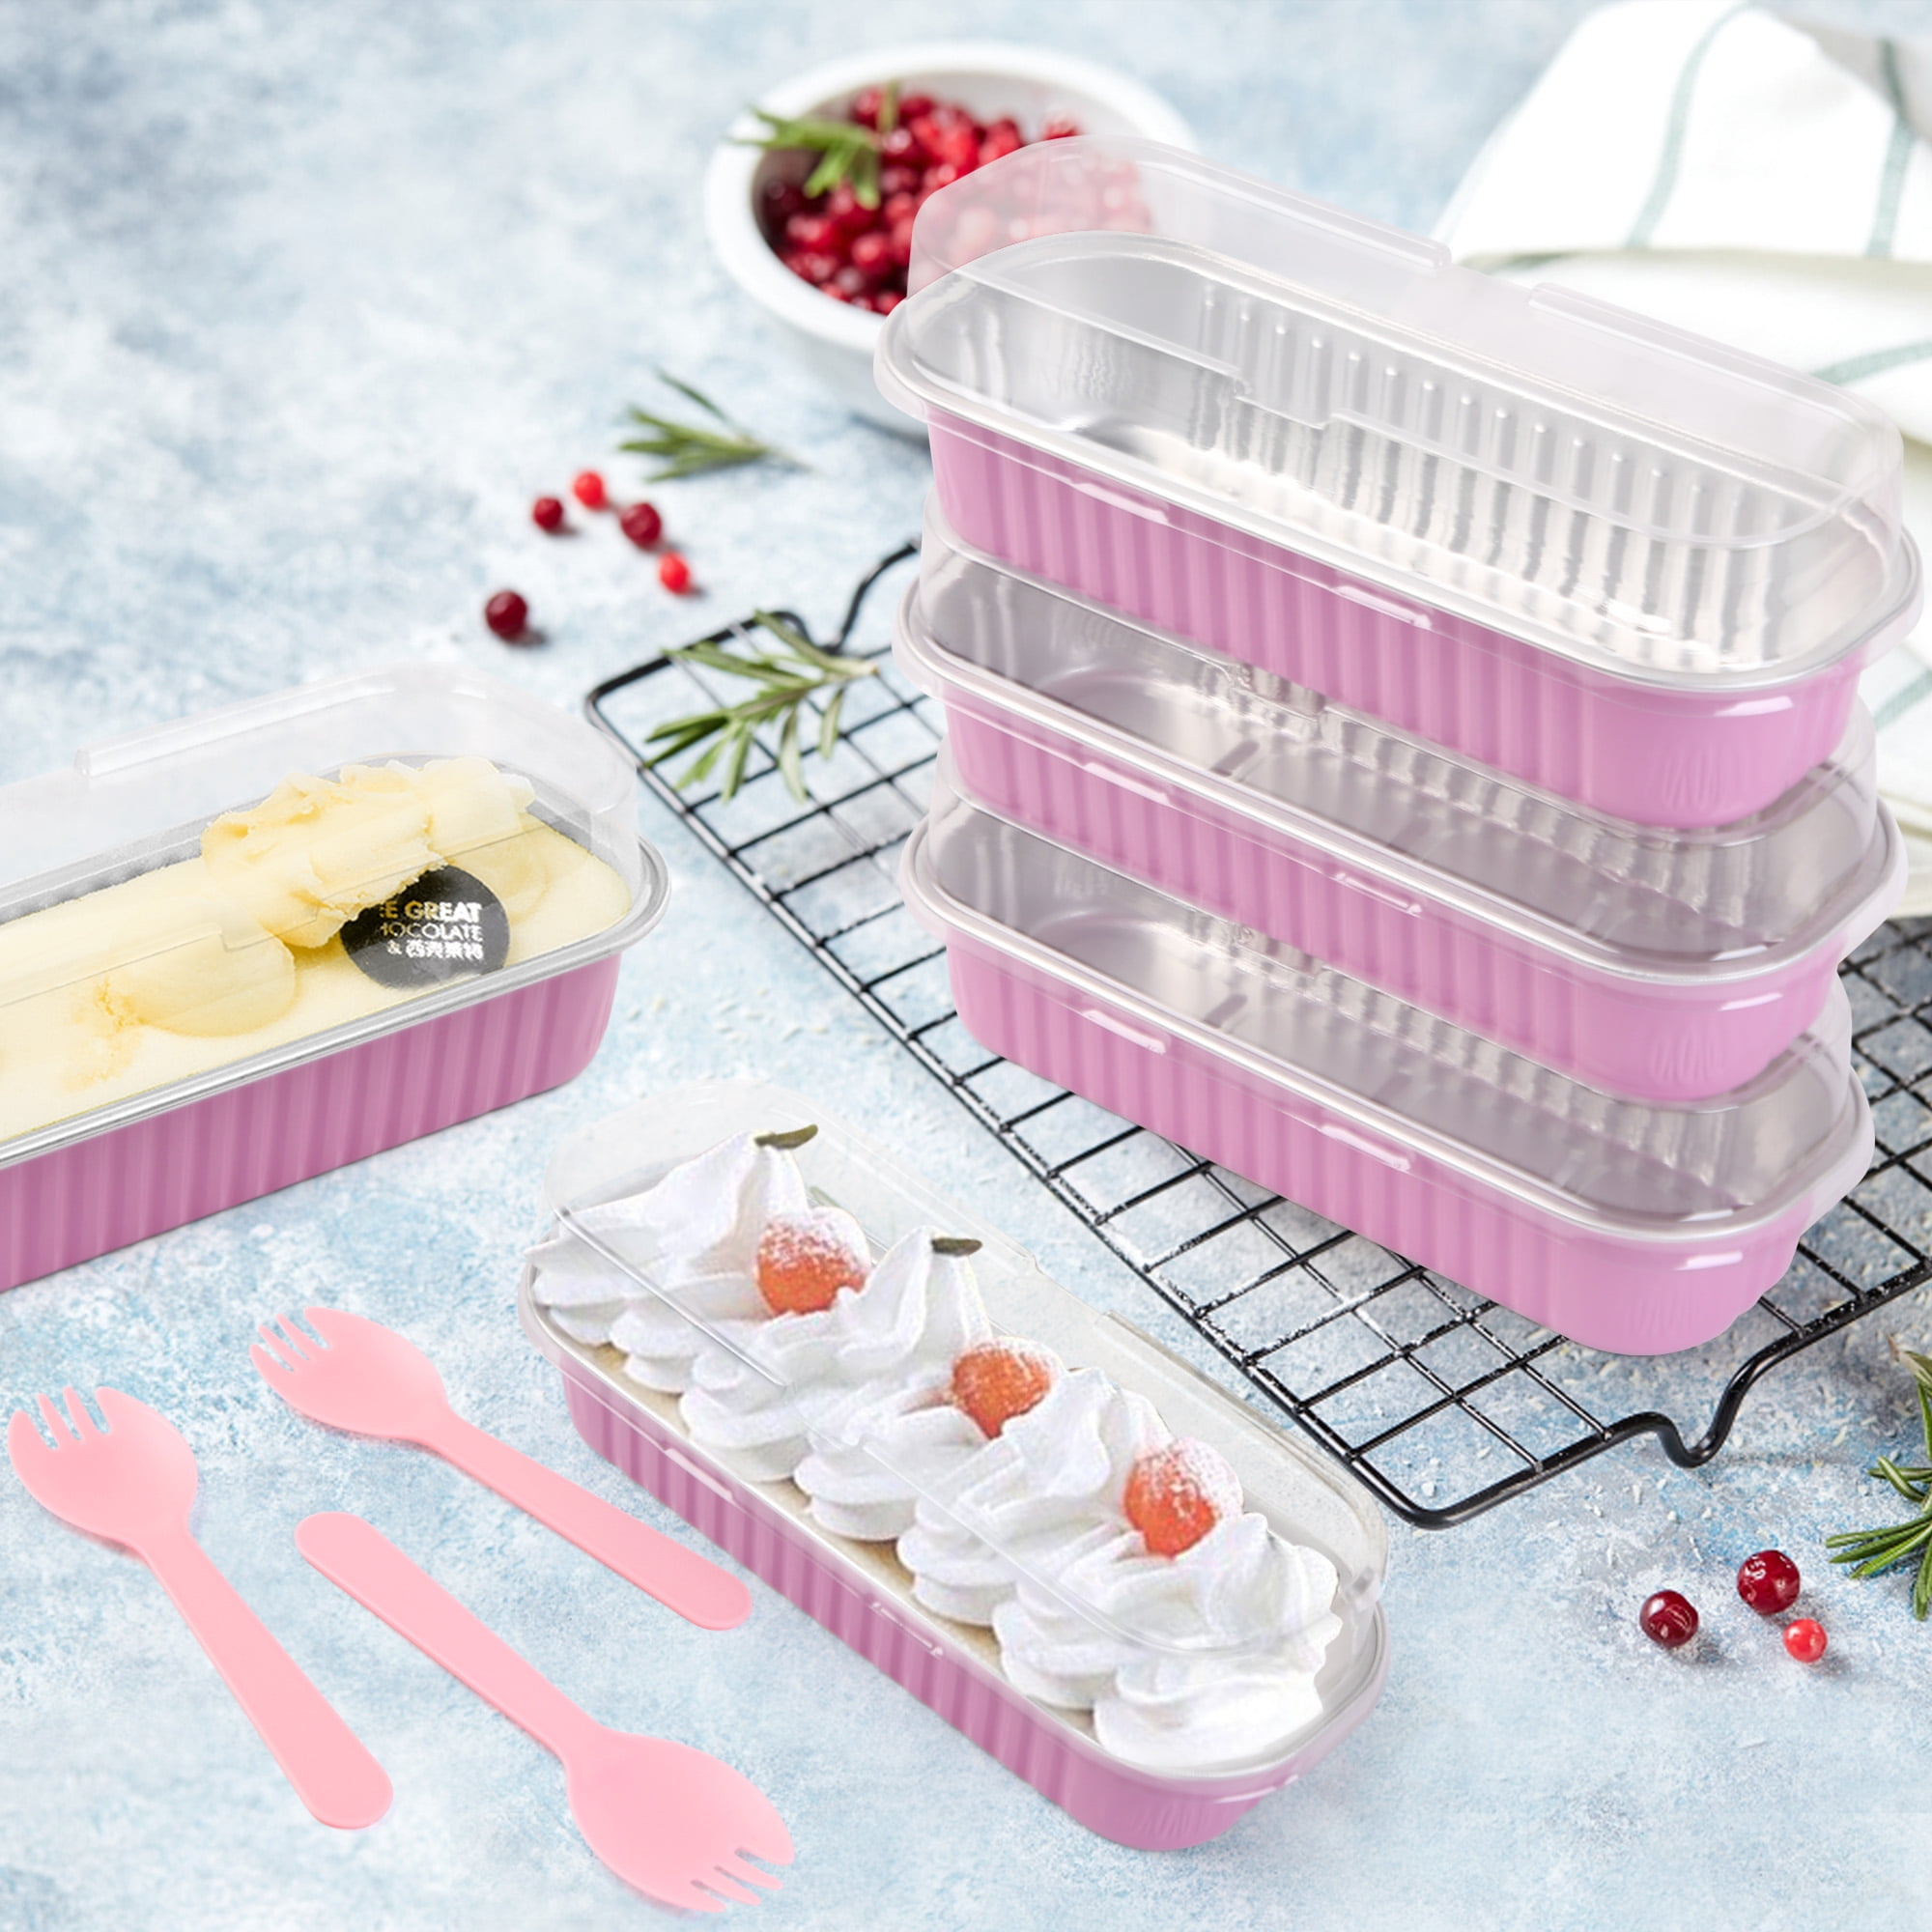 JOYKLE Mini Cake Pans with Lids,50 Pack Mini Loaf Baking Pans and Lids  Covers,Aluminum Foil Long Baking Cups,Disposable Foil Cupcake Liners for